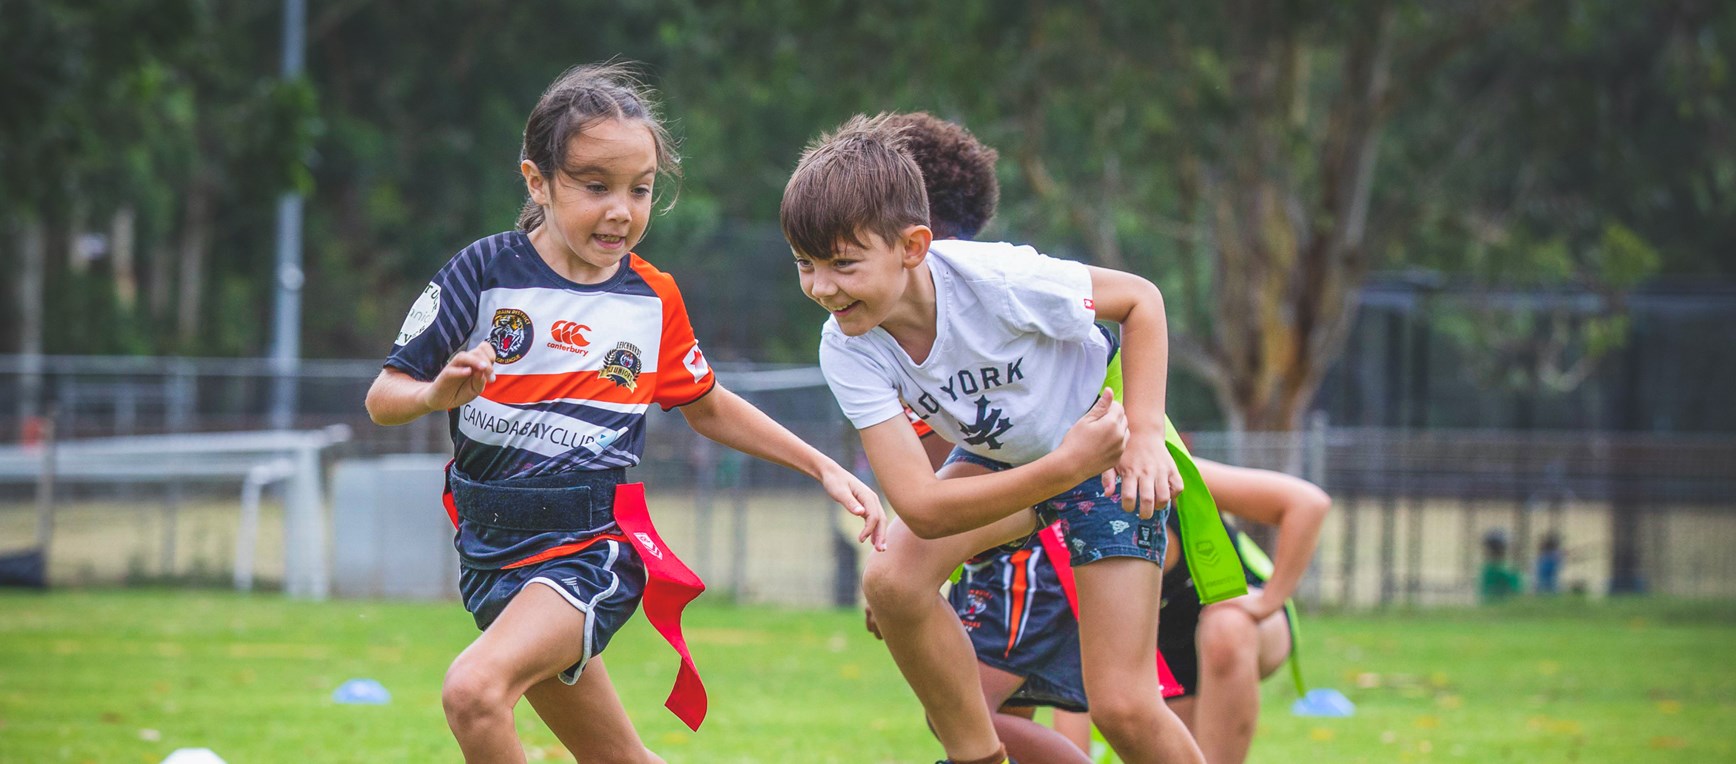 Plenty of smiles at Wests Tigers school holiday clinics!